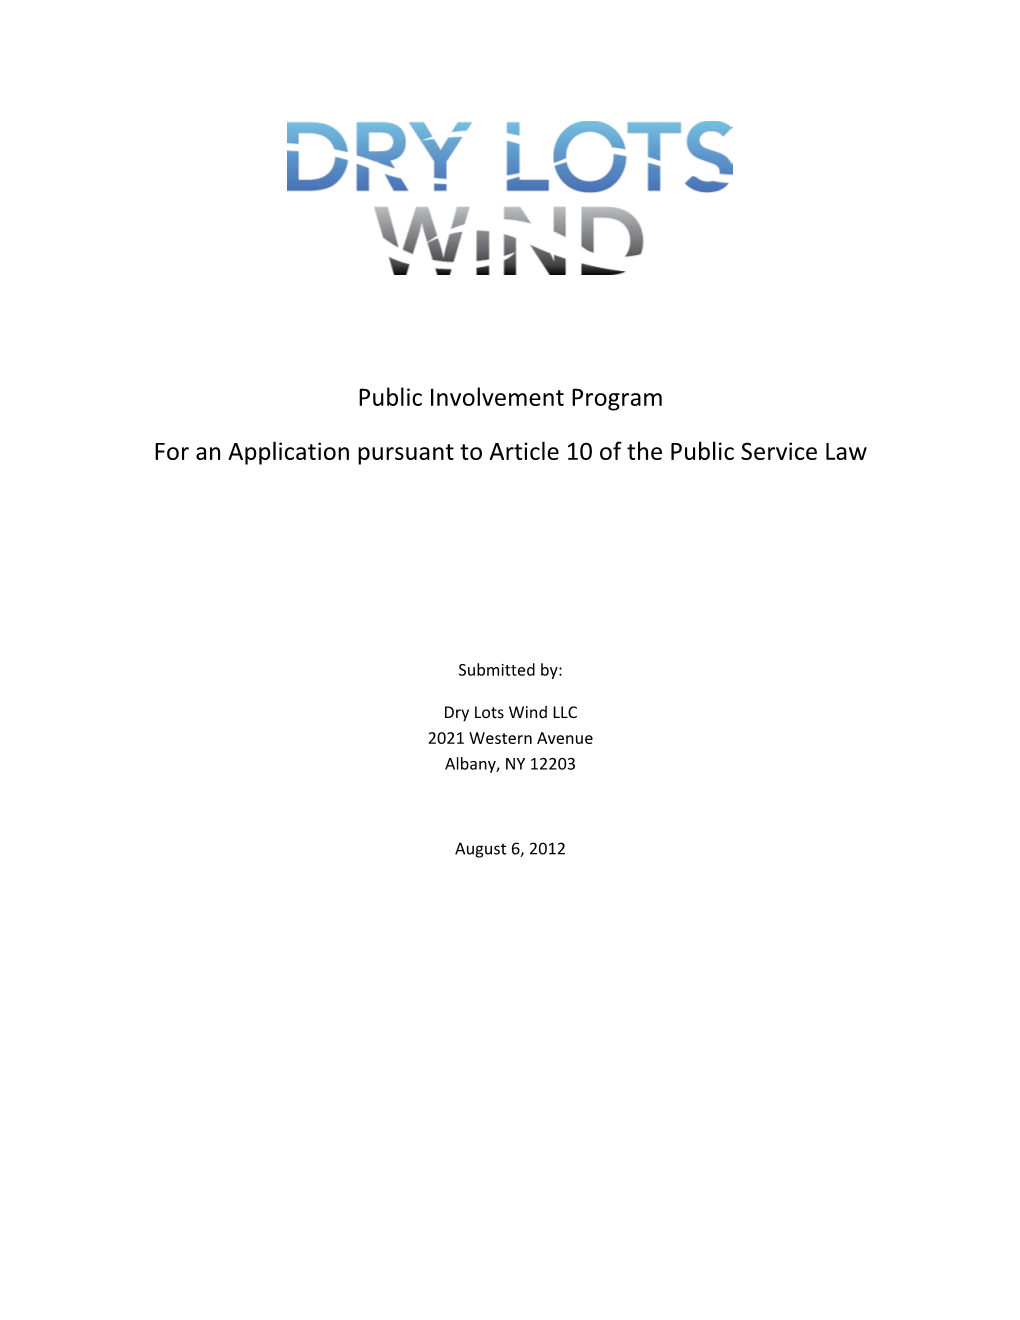 Public Involvement Program for an Application Pursuant to Article 10 of the Public Service